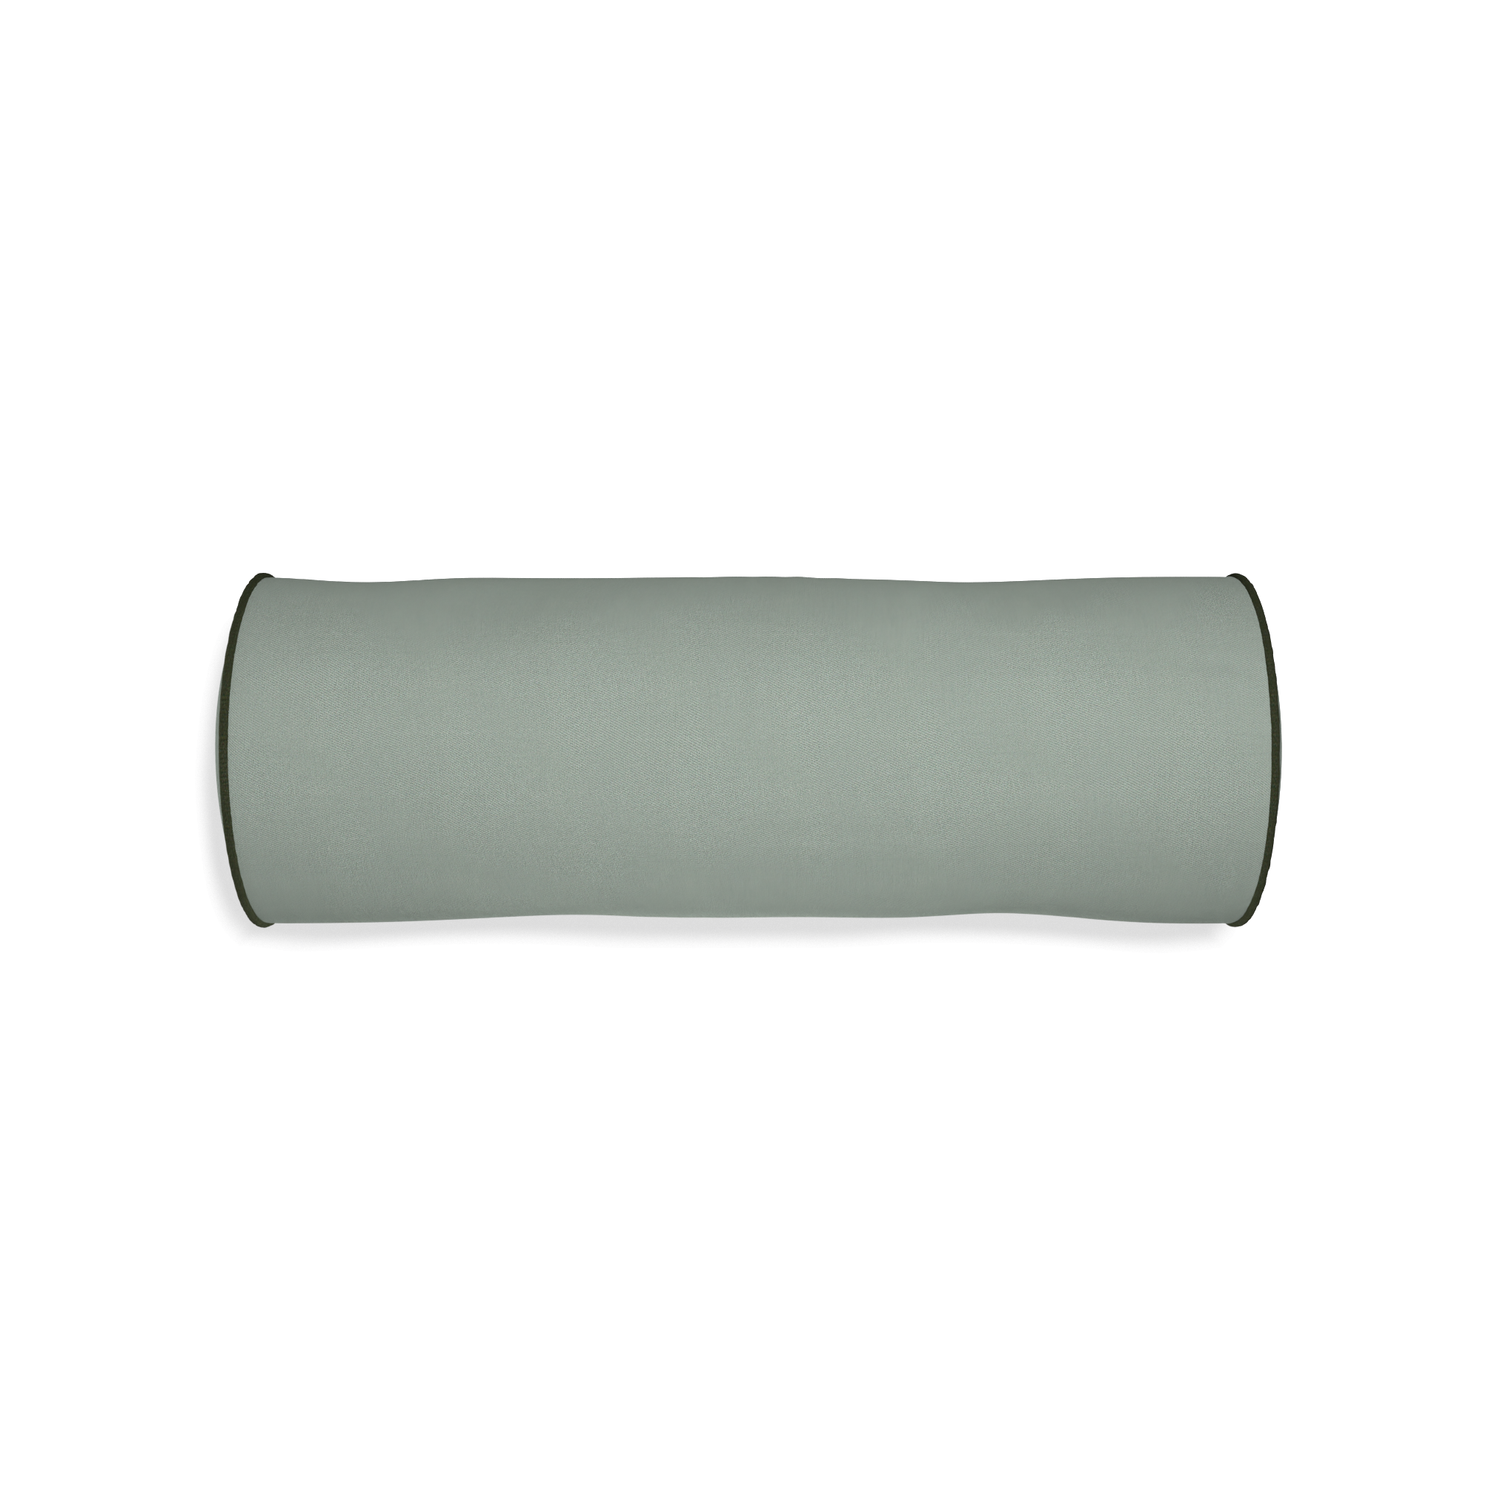 Bolster sage custom sage green cottonpillow with f piping on white background